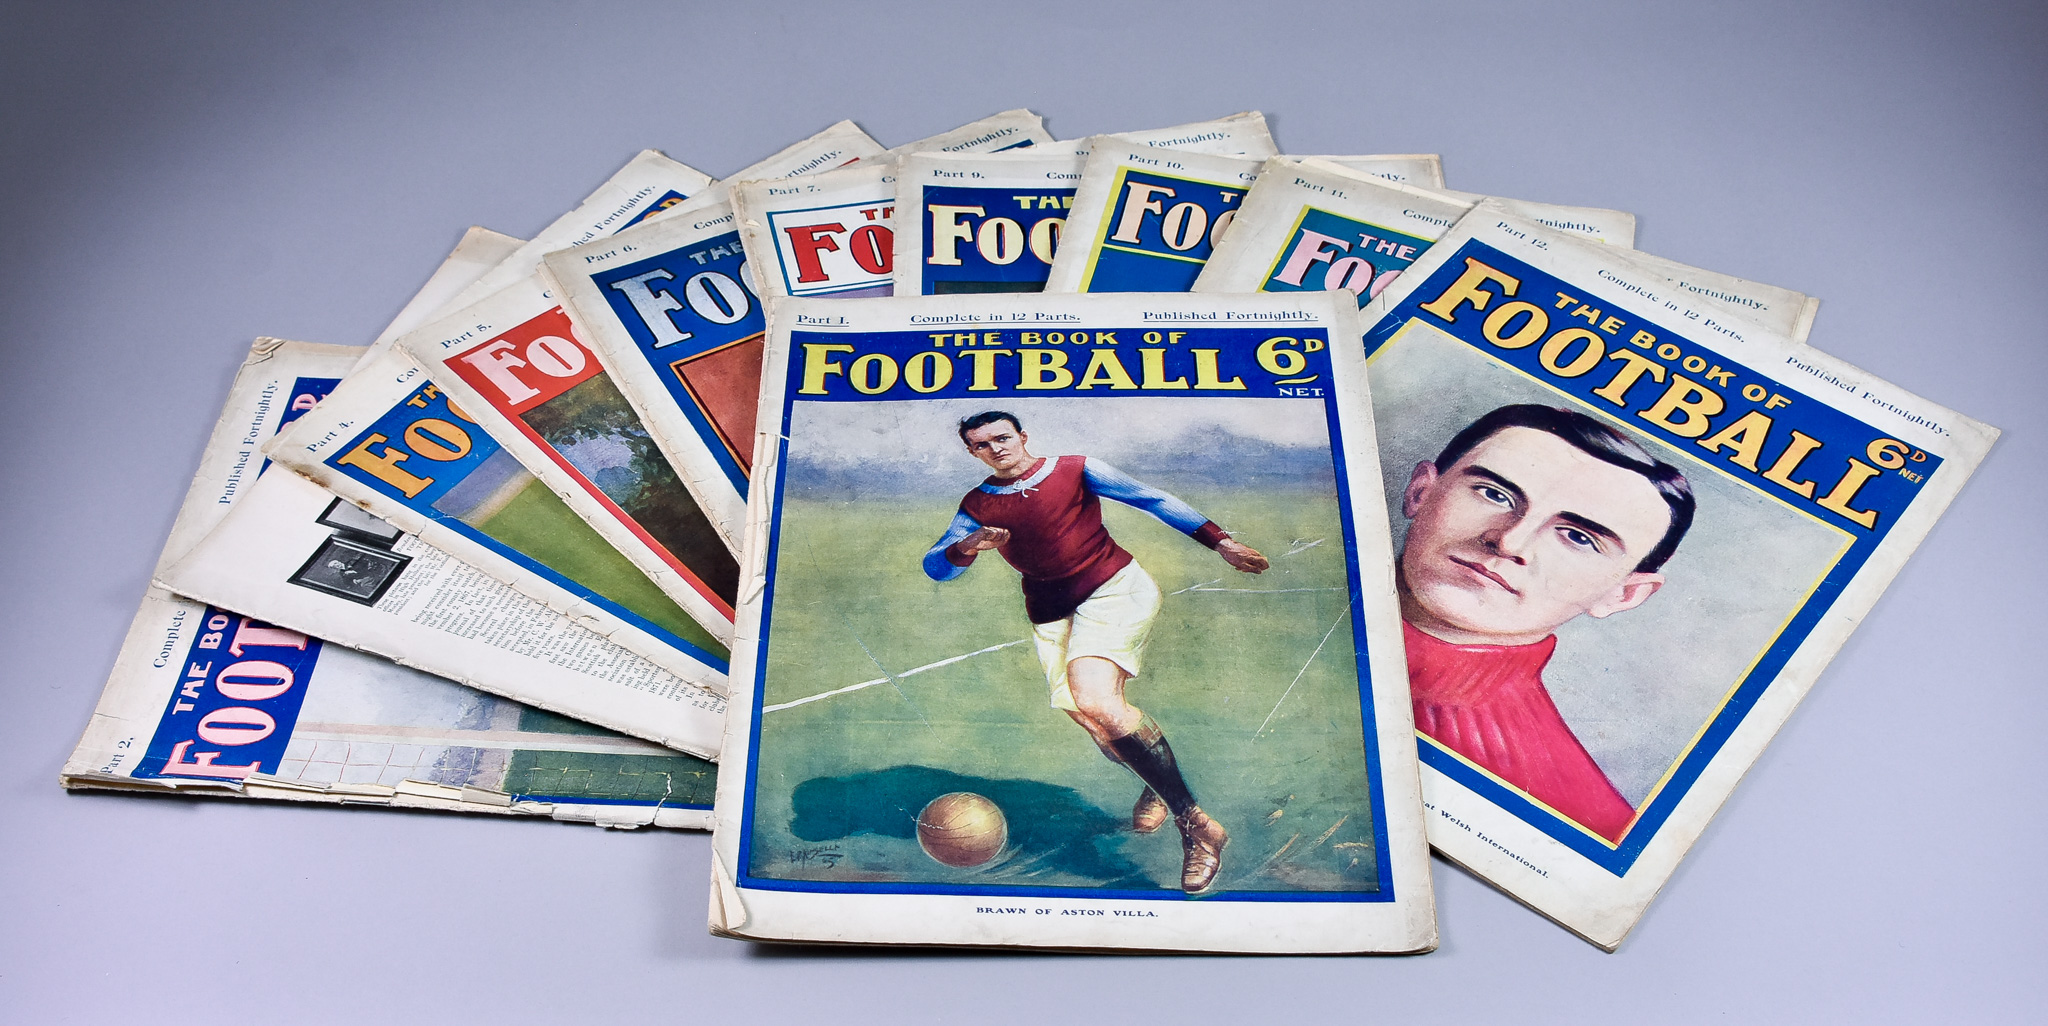 "The Book of Football", Parts 1 to 7 and 9 to 12, 1905-1906, published fortnightly and retailed